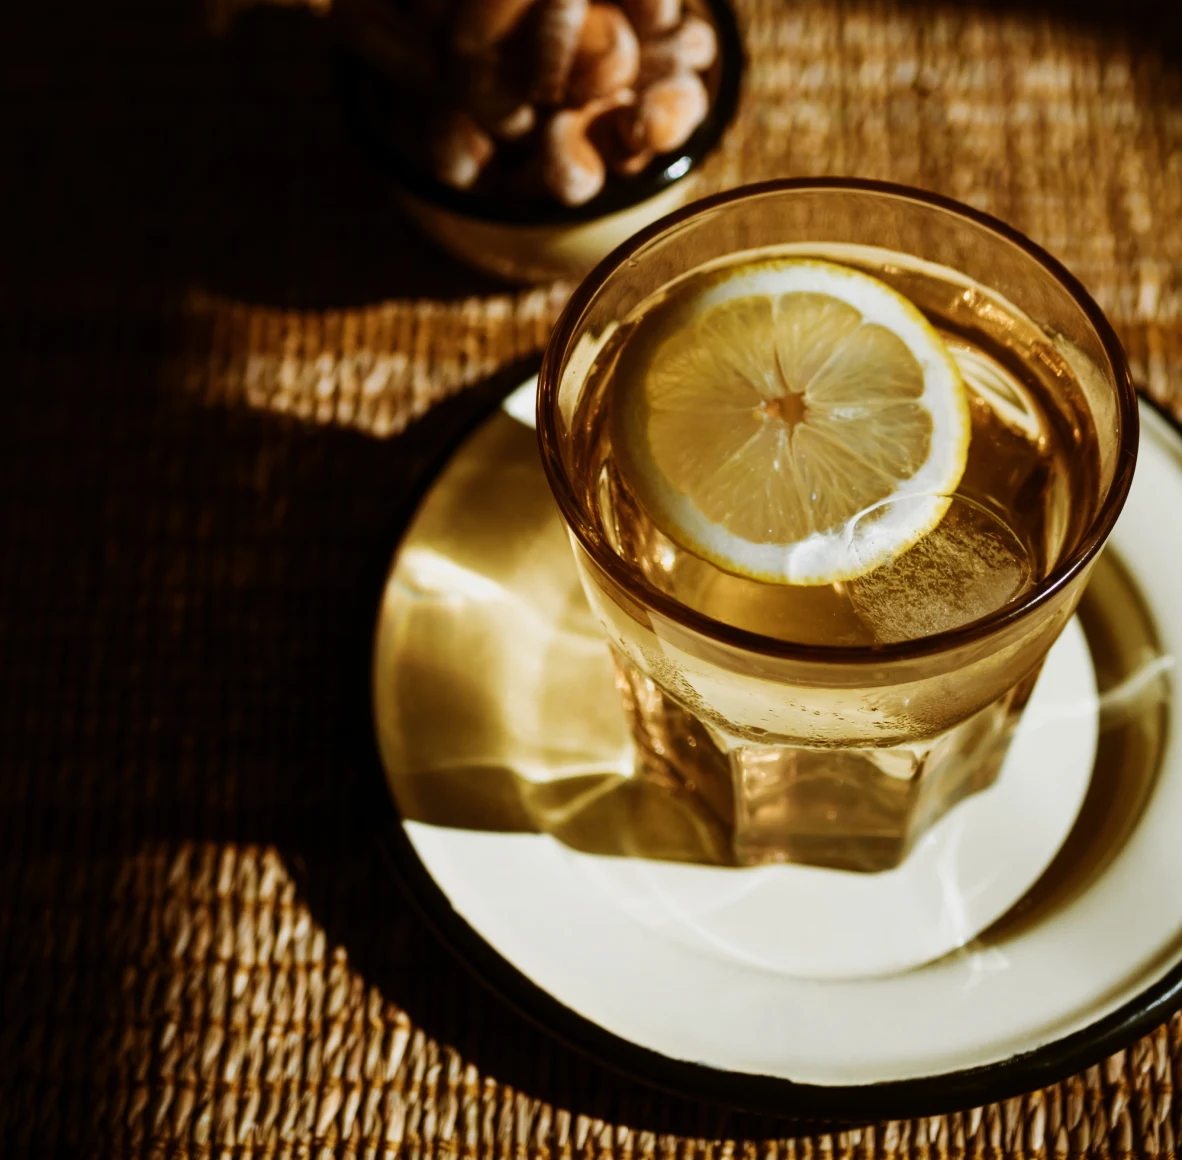 A glass of water with lemon on top of a small white plate with a bowl of nuts behind it slightly out of focus